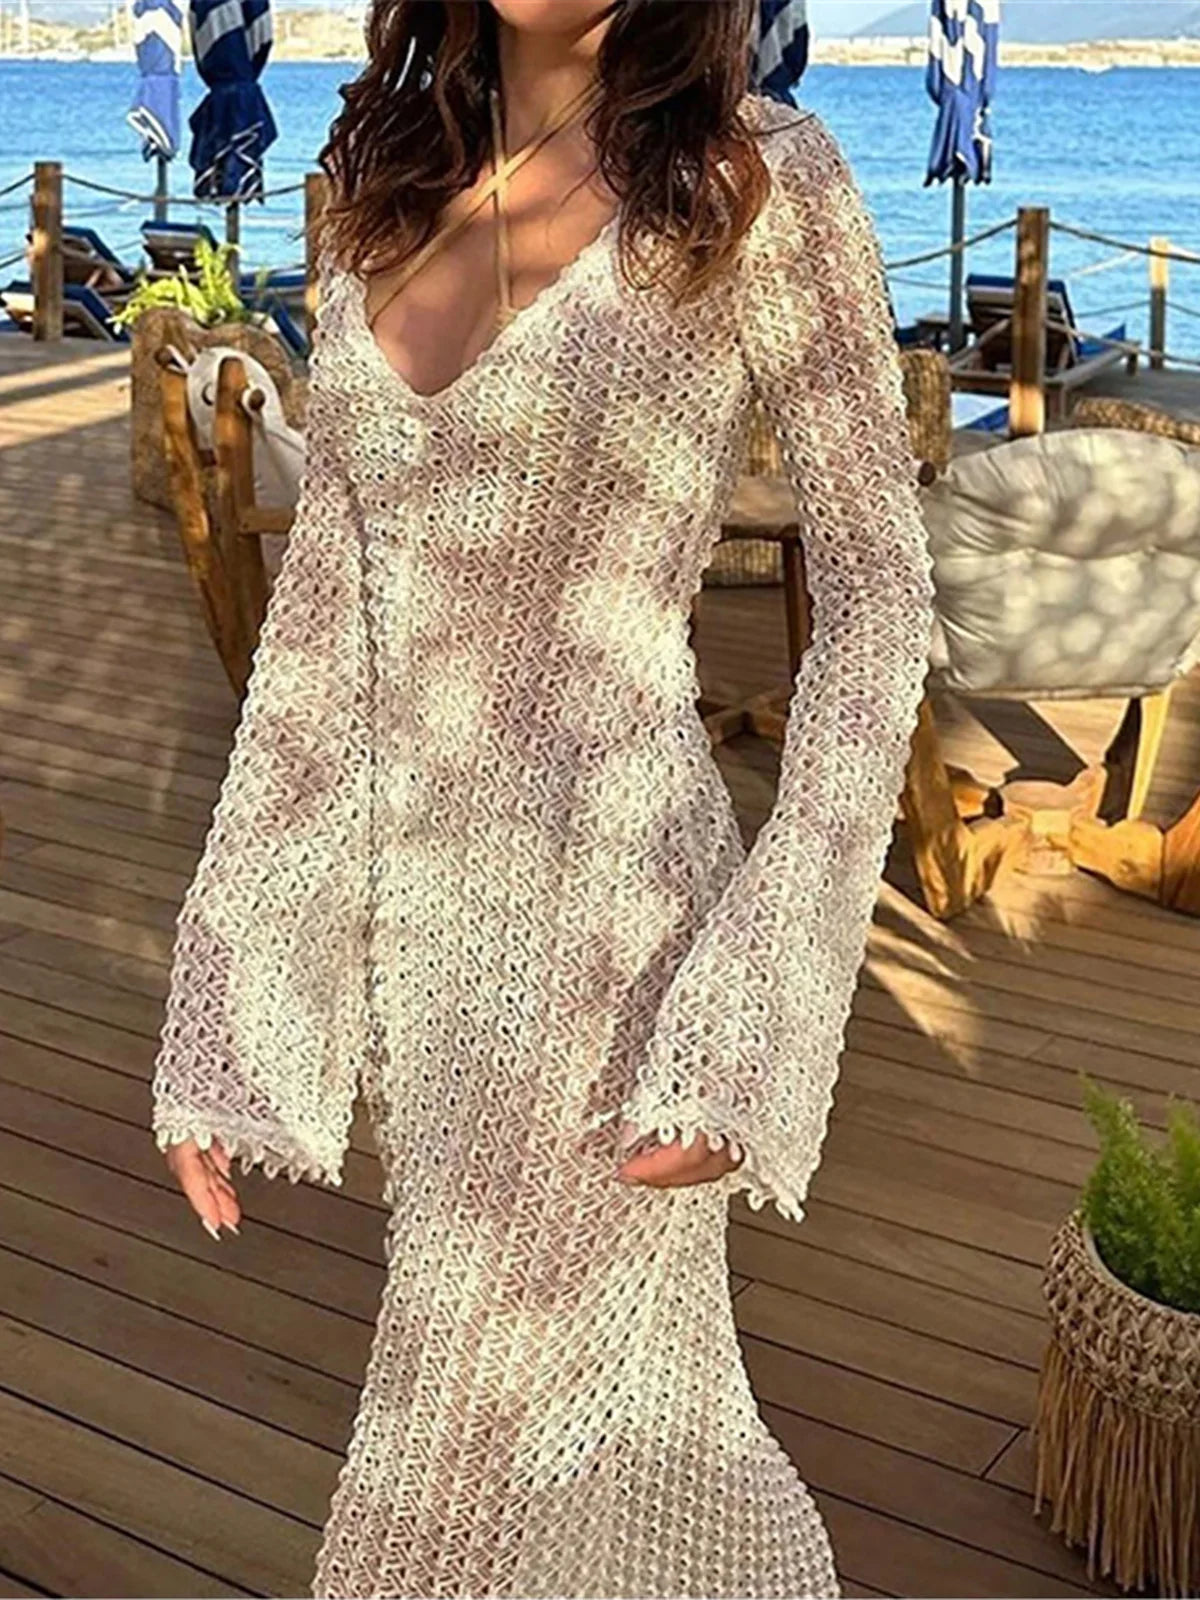 Elegant long sleeve crochet tunic beach cover-up, ideal for seaside styling. Features a delicate see-through design, crafted from a mix of nylon, polyester, rayon, and cotton. True to size, available in white.